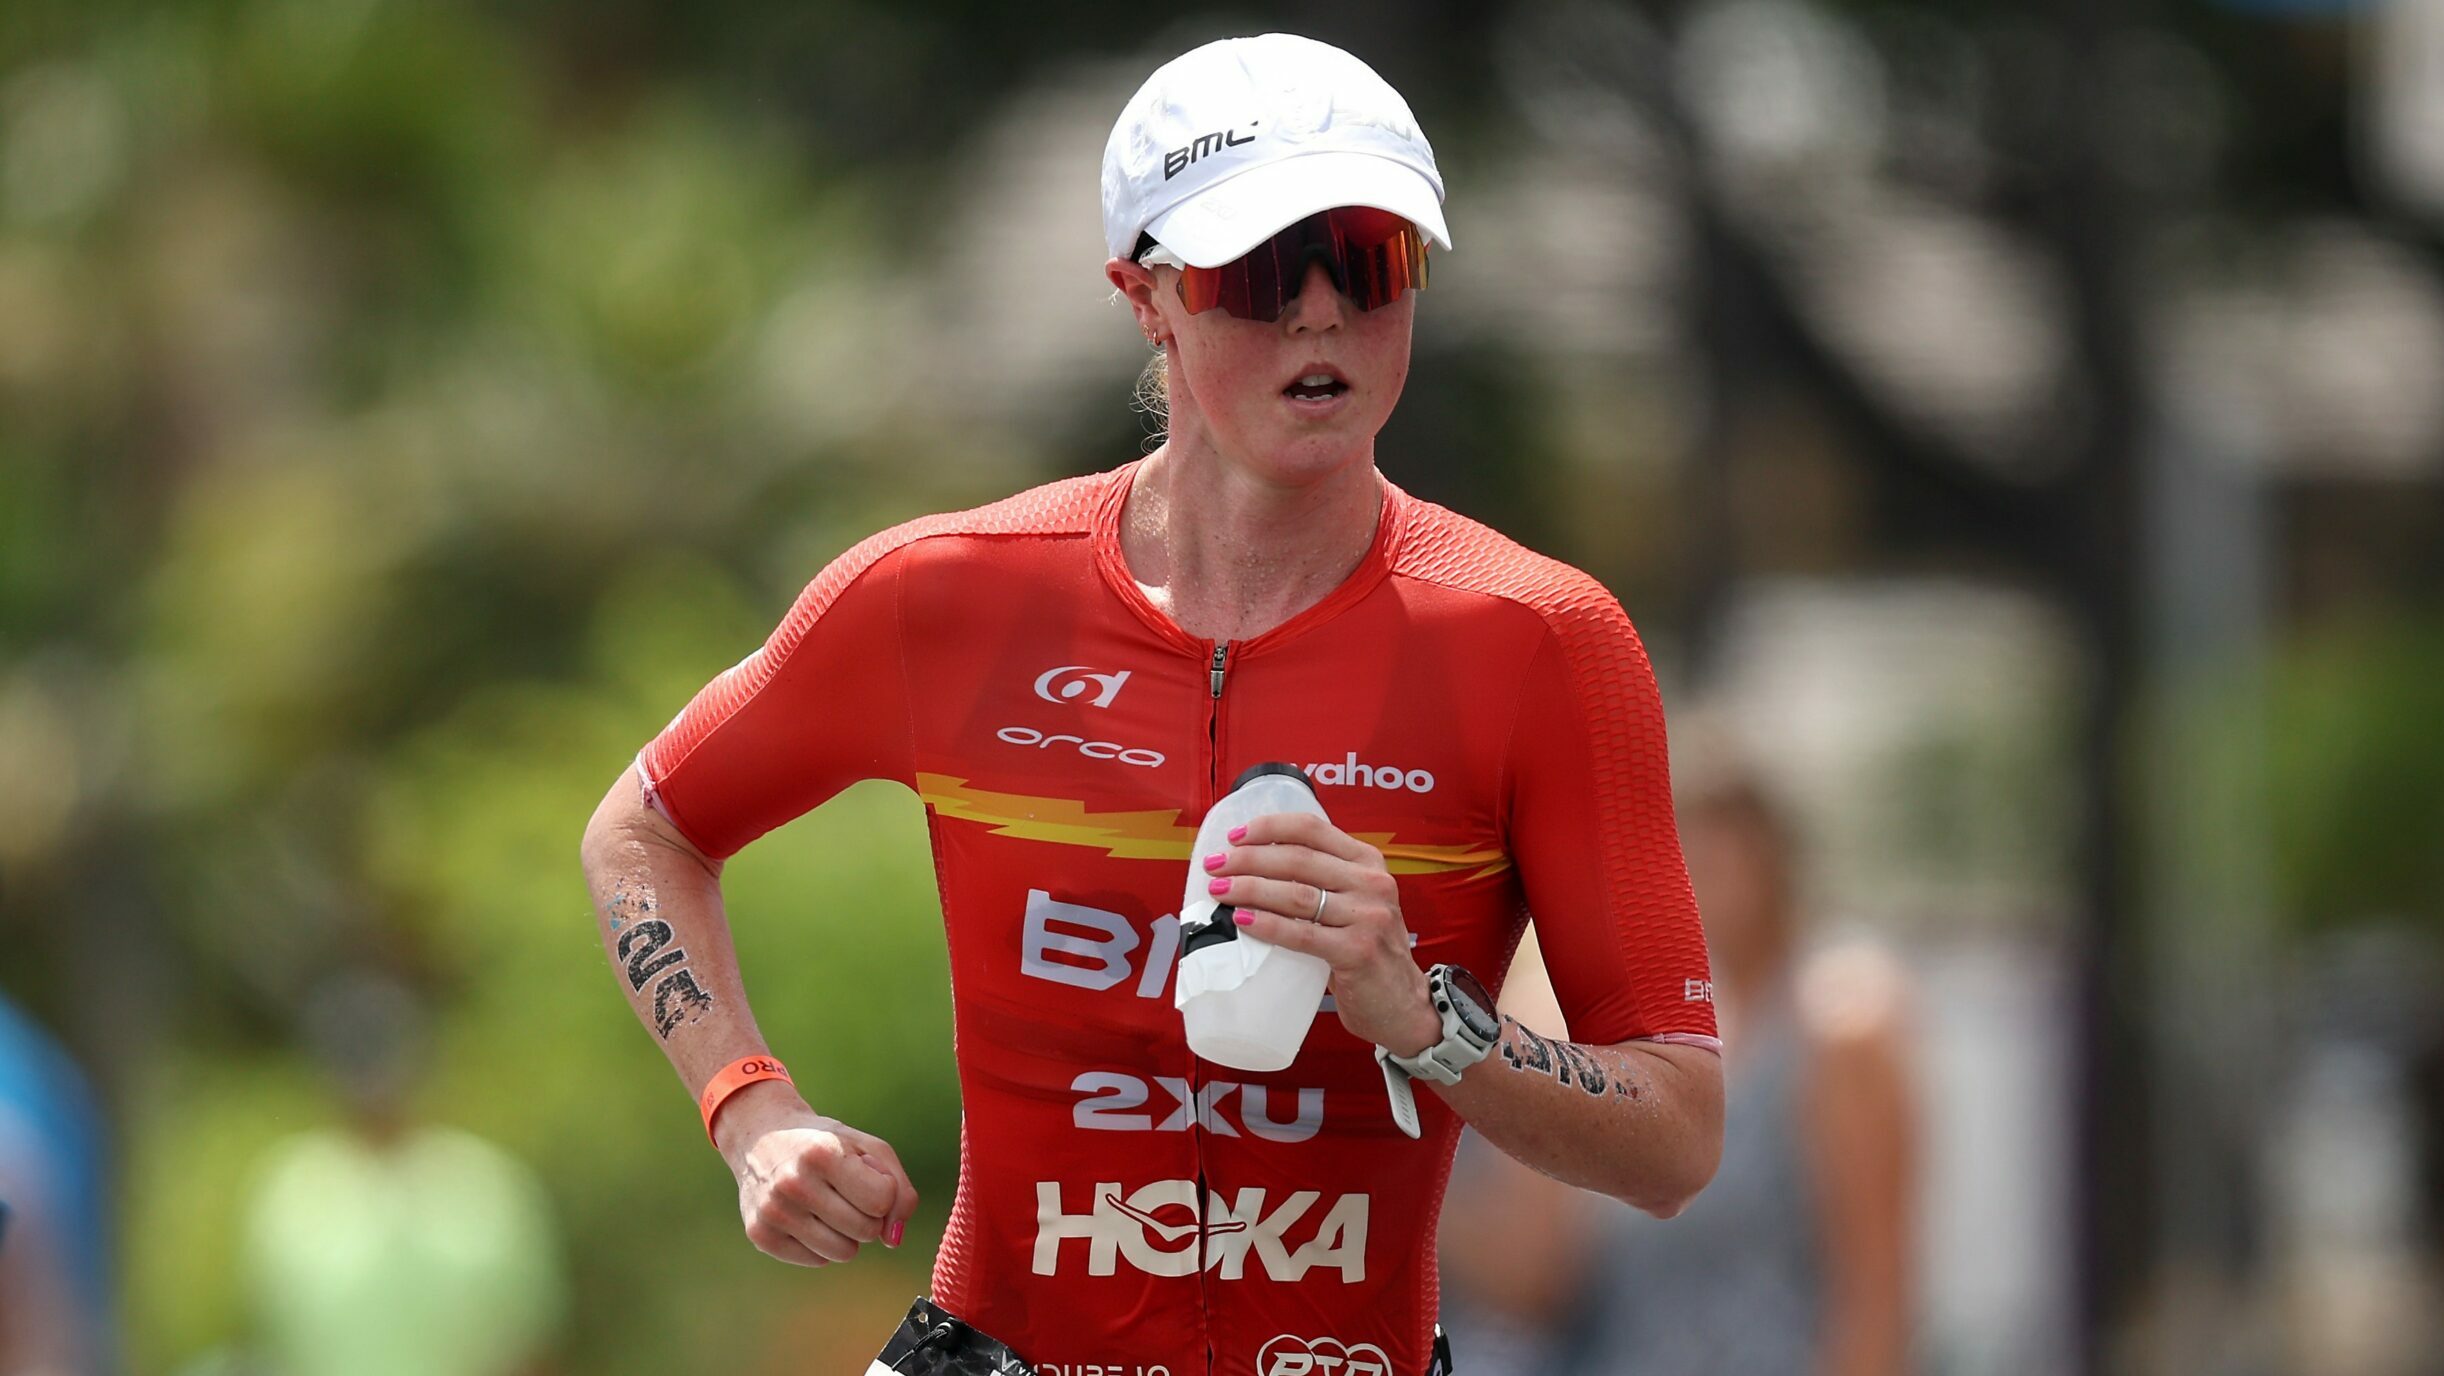 IRONMAN Kona Tips: How to beat the brutal Hawaii heat, and what to do if things go wrong